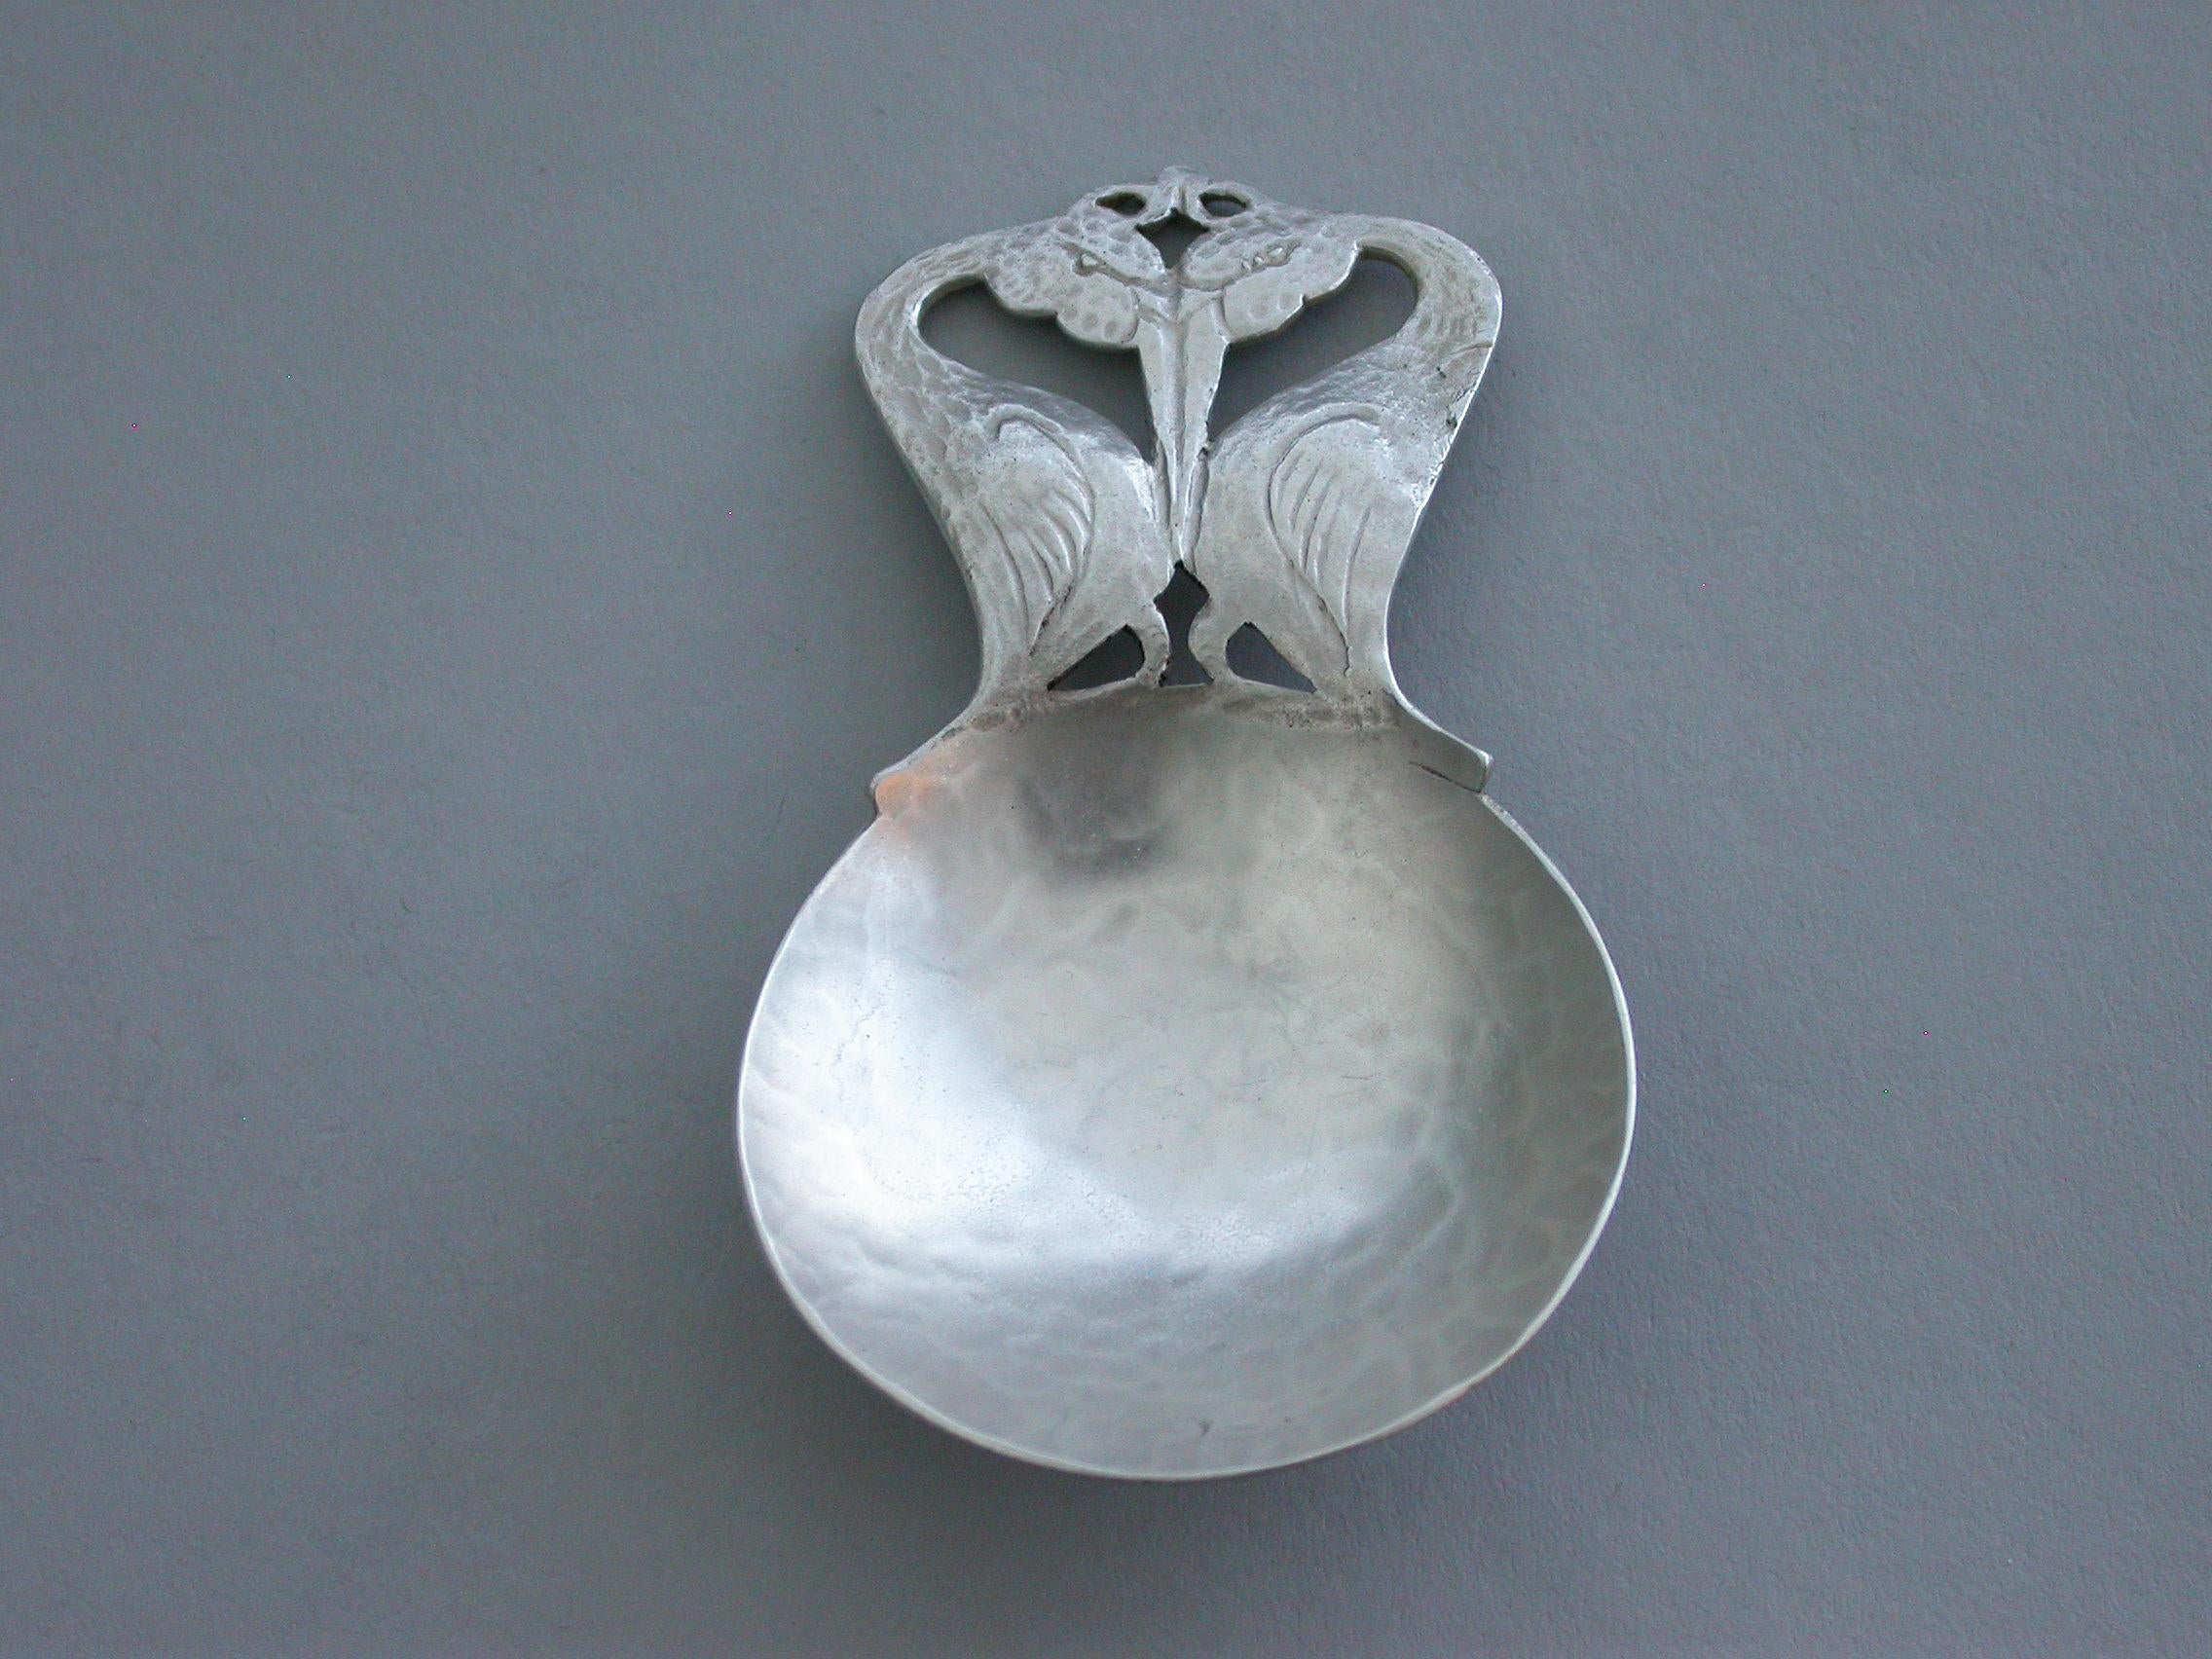 A rare early 20th century hammered silver Caddy spoon made in the Arts & Crafts style, with circular bowl and pierced handle depicting two stylized storks, sitting face to face.

By Bernard Instone, Birmingham, 1928

In good condition with no